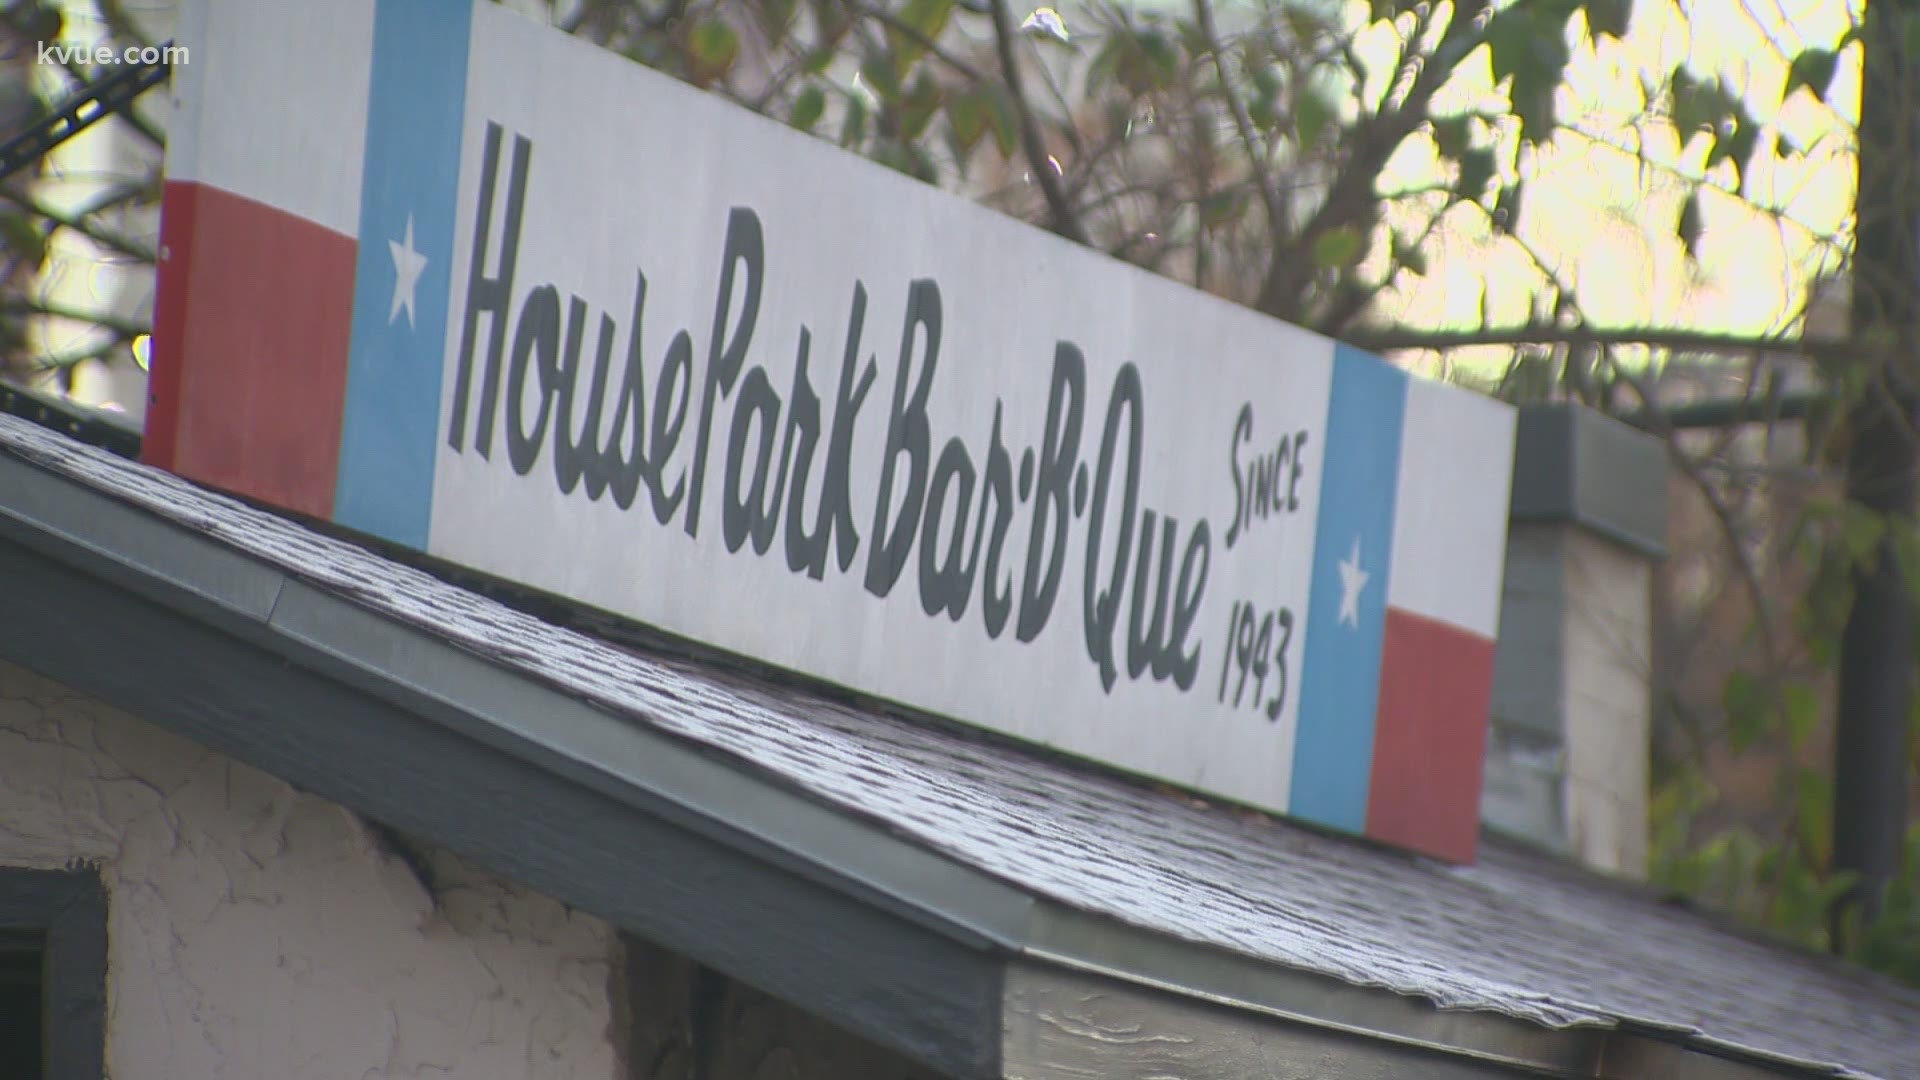 The clean-up continues after a devastating fire at House Park BBQ in Downtown Austin. The owners say the inside of the building was destroyed.